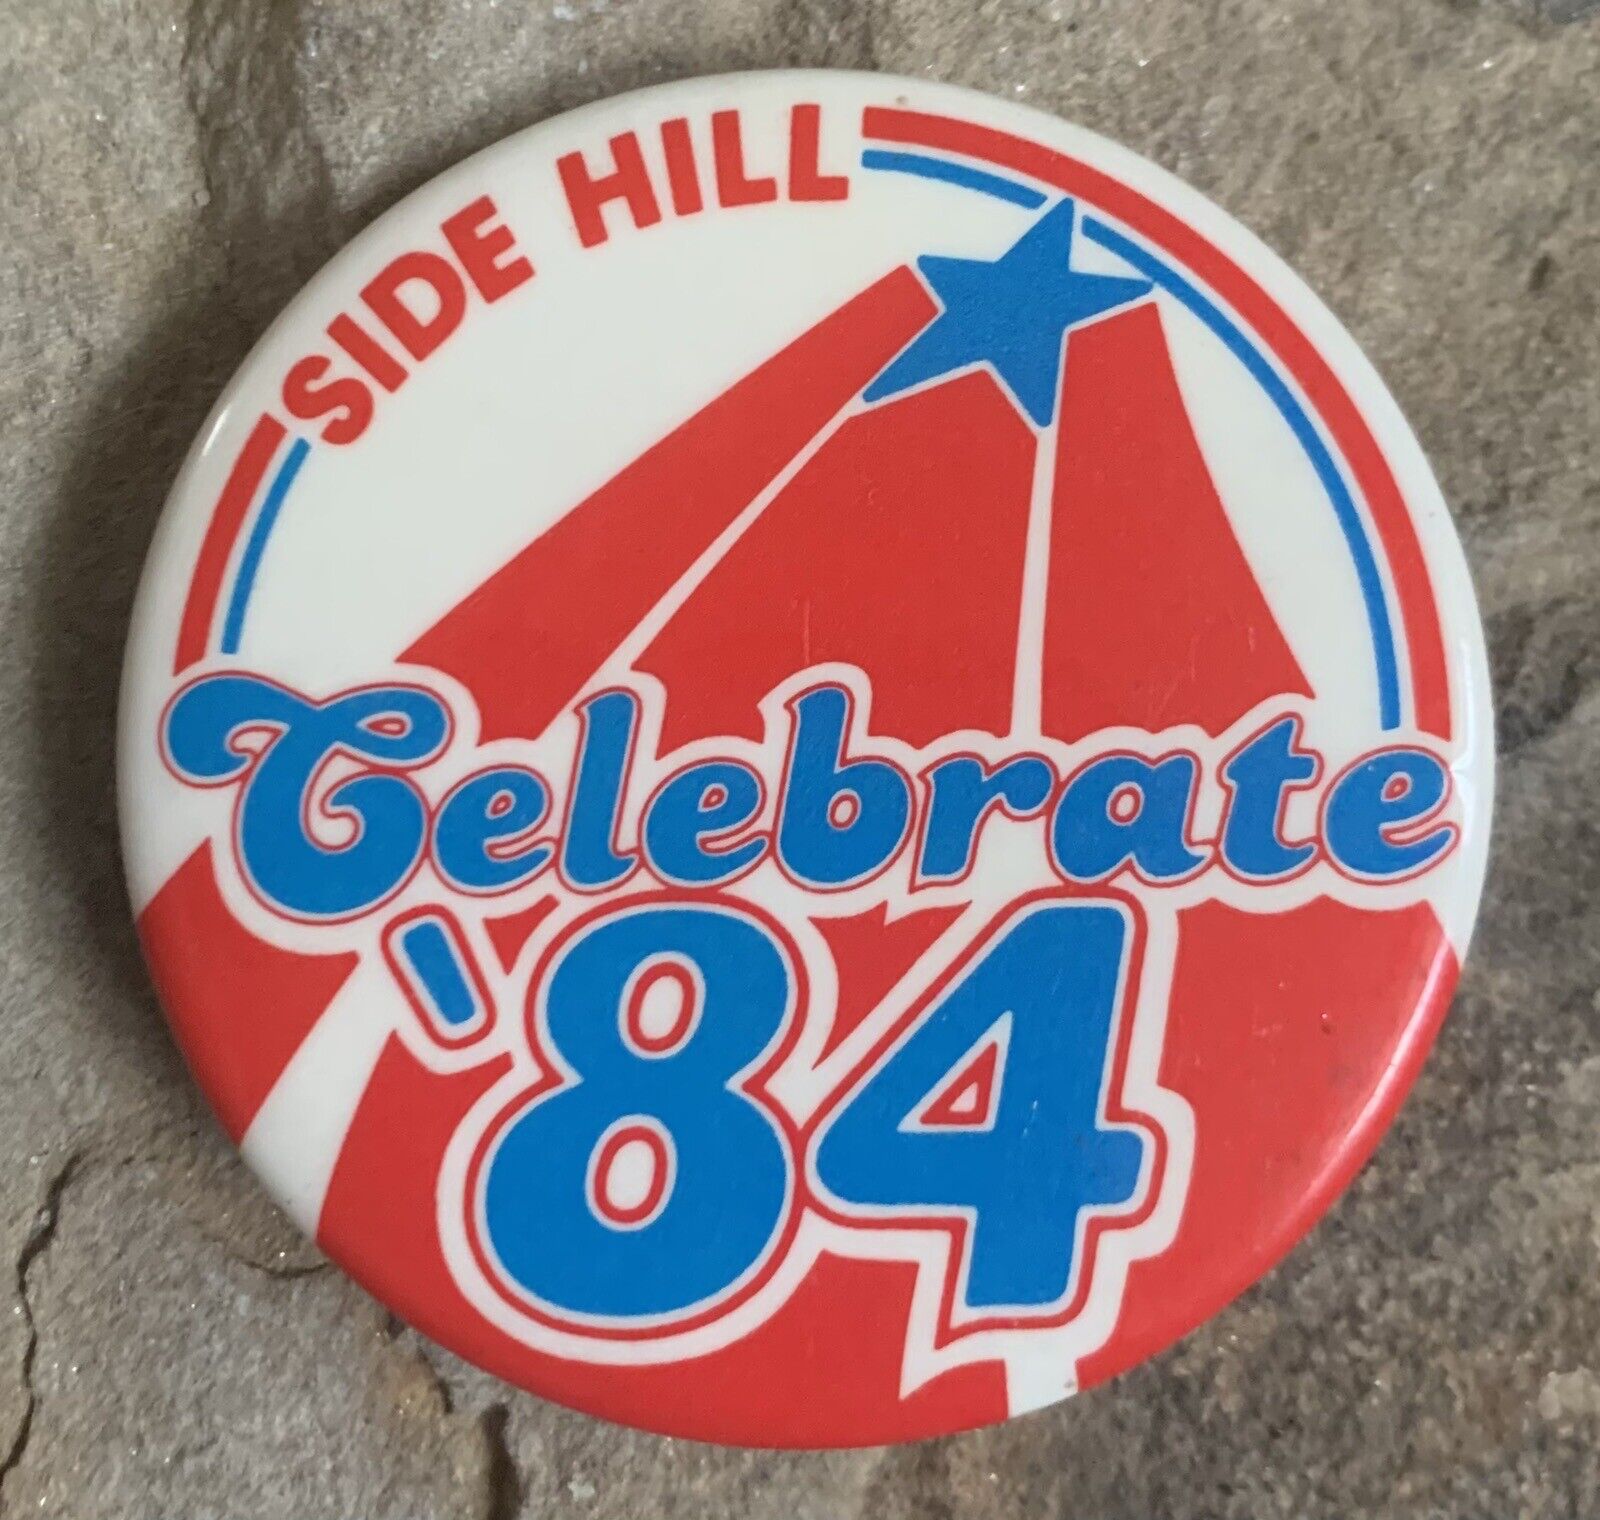 Vintage Side Hill Celebrate 84 Button. Okay Condition 